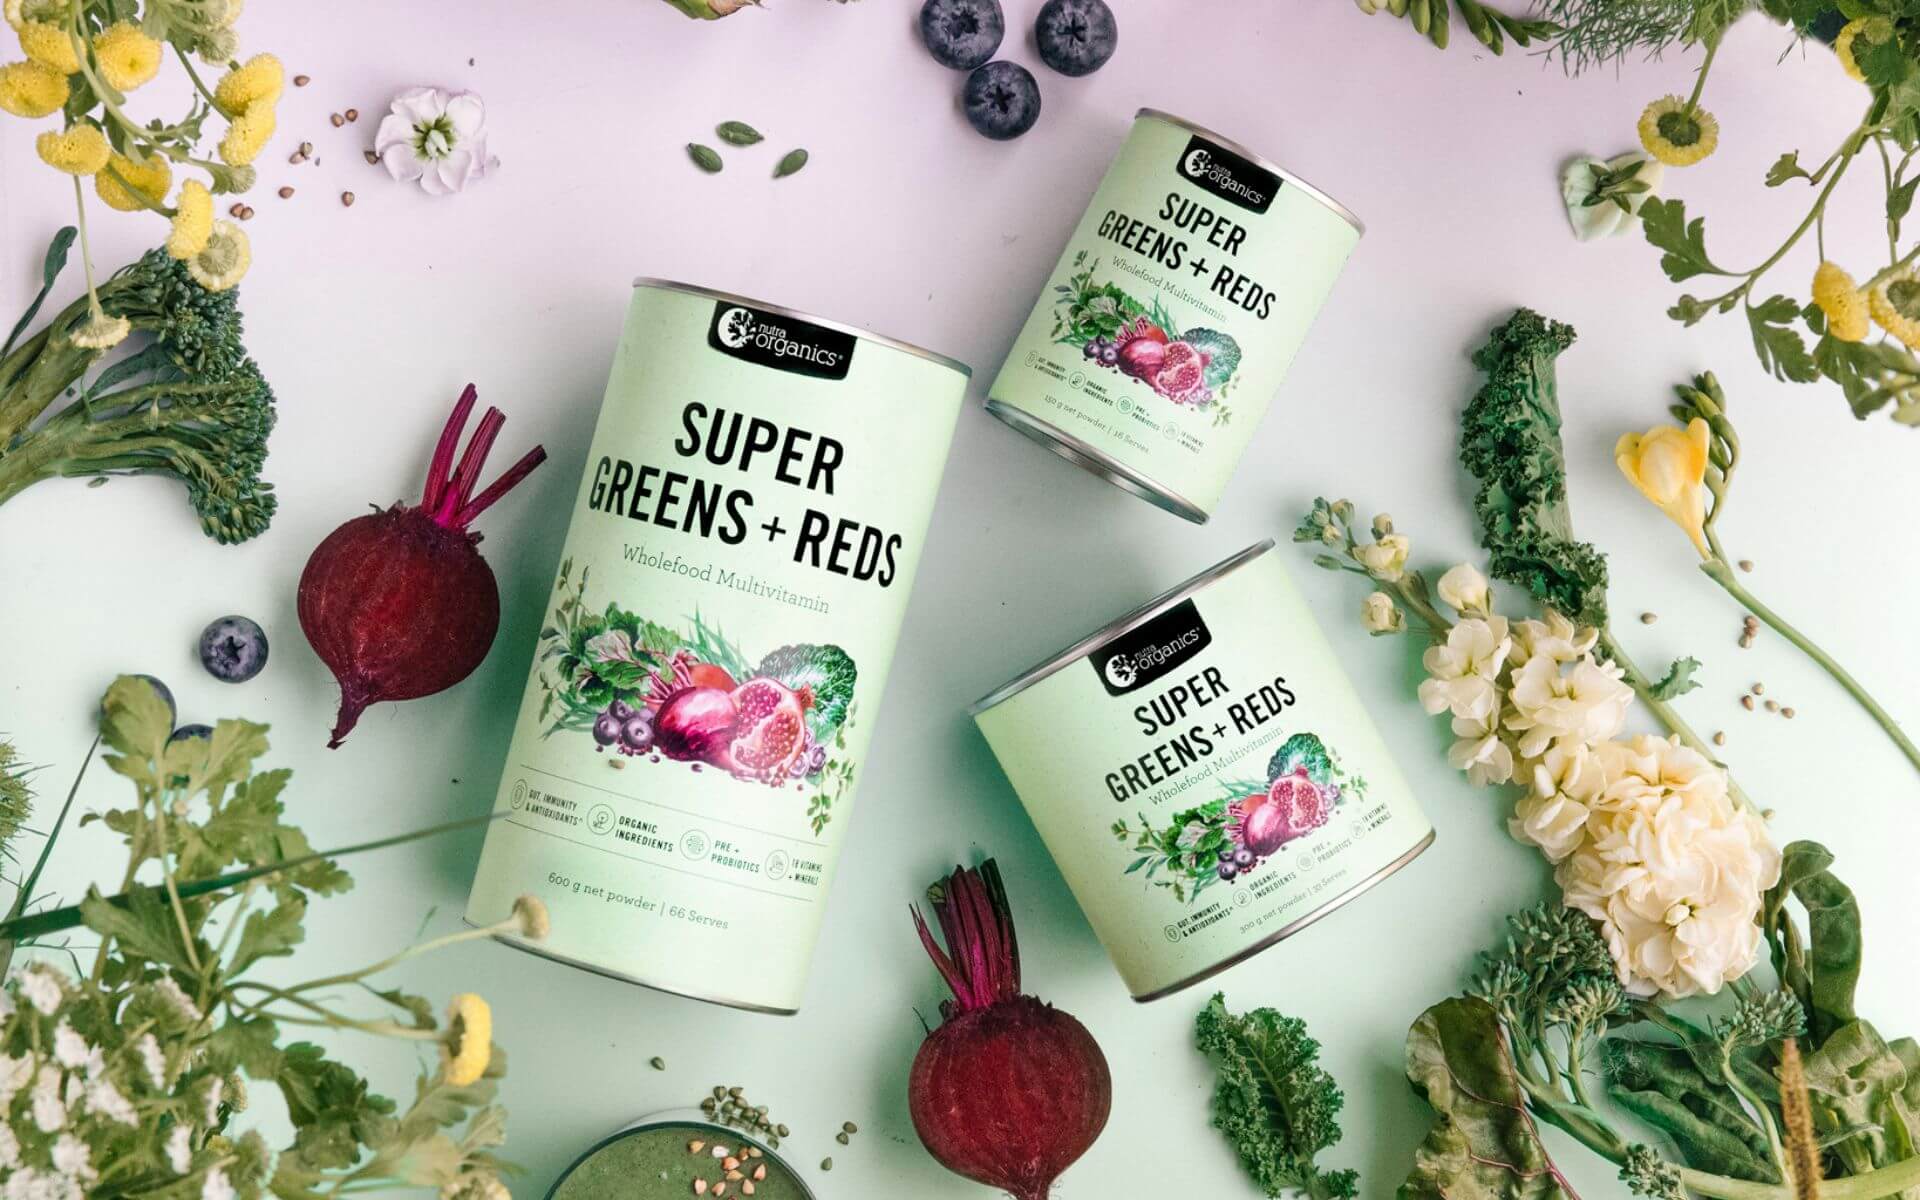 Super Greens + Reds packaging surrounded by leafy greens and beetroot